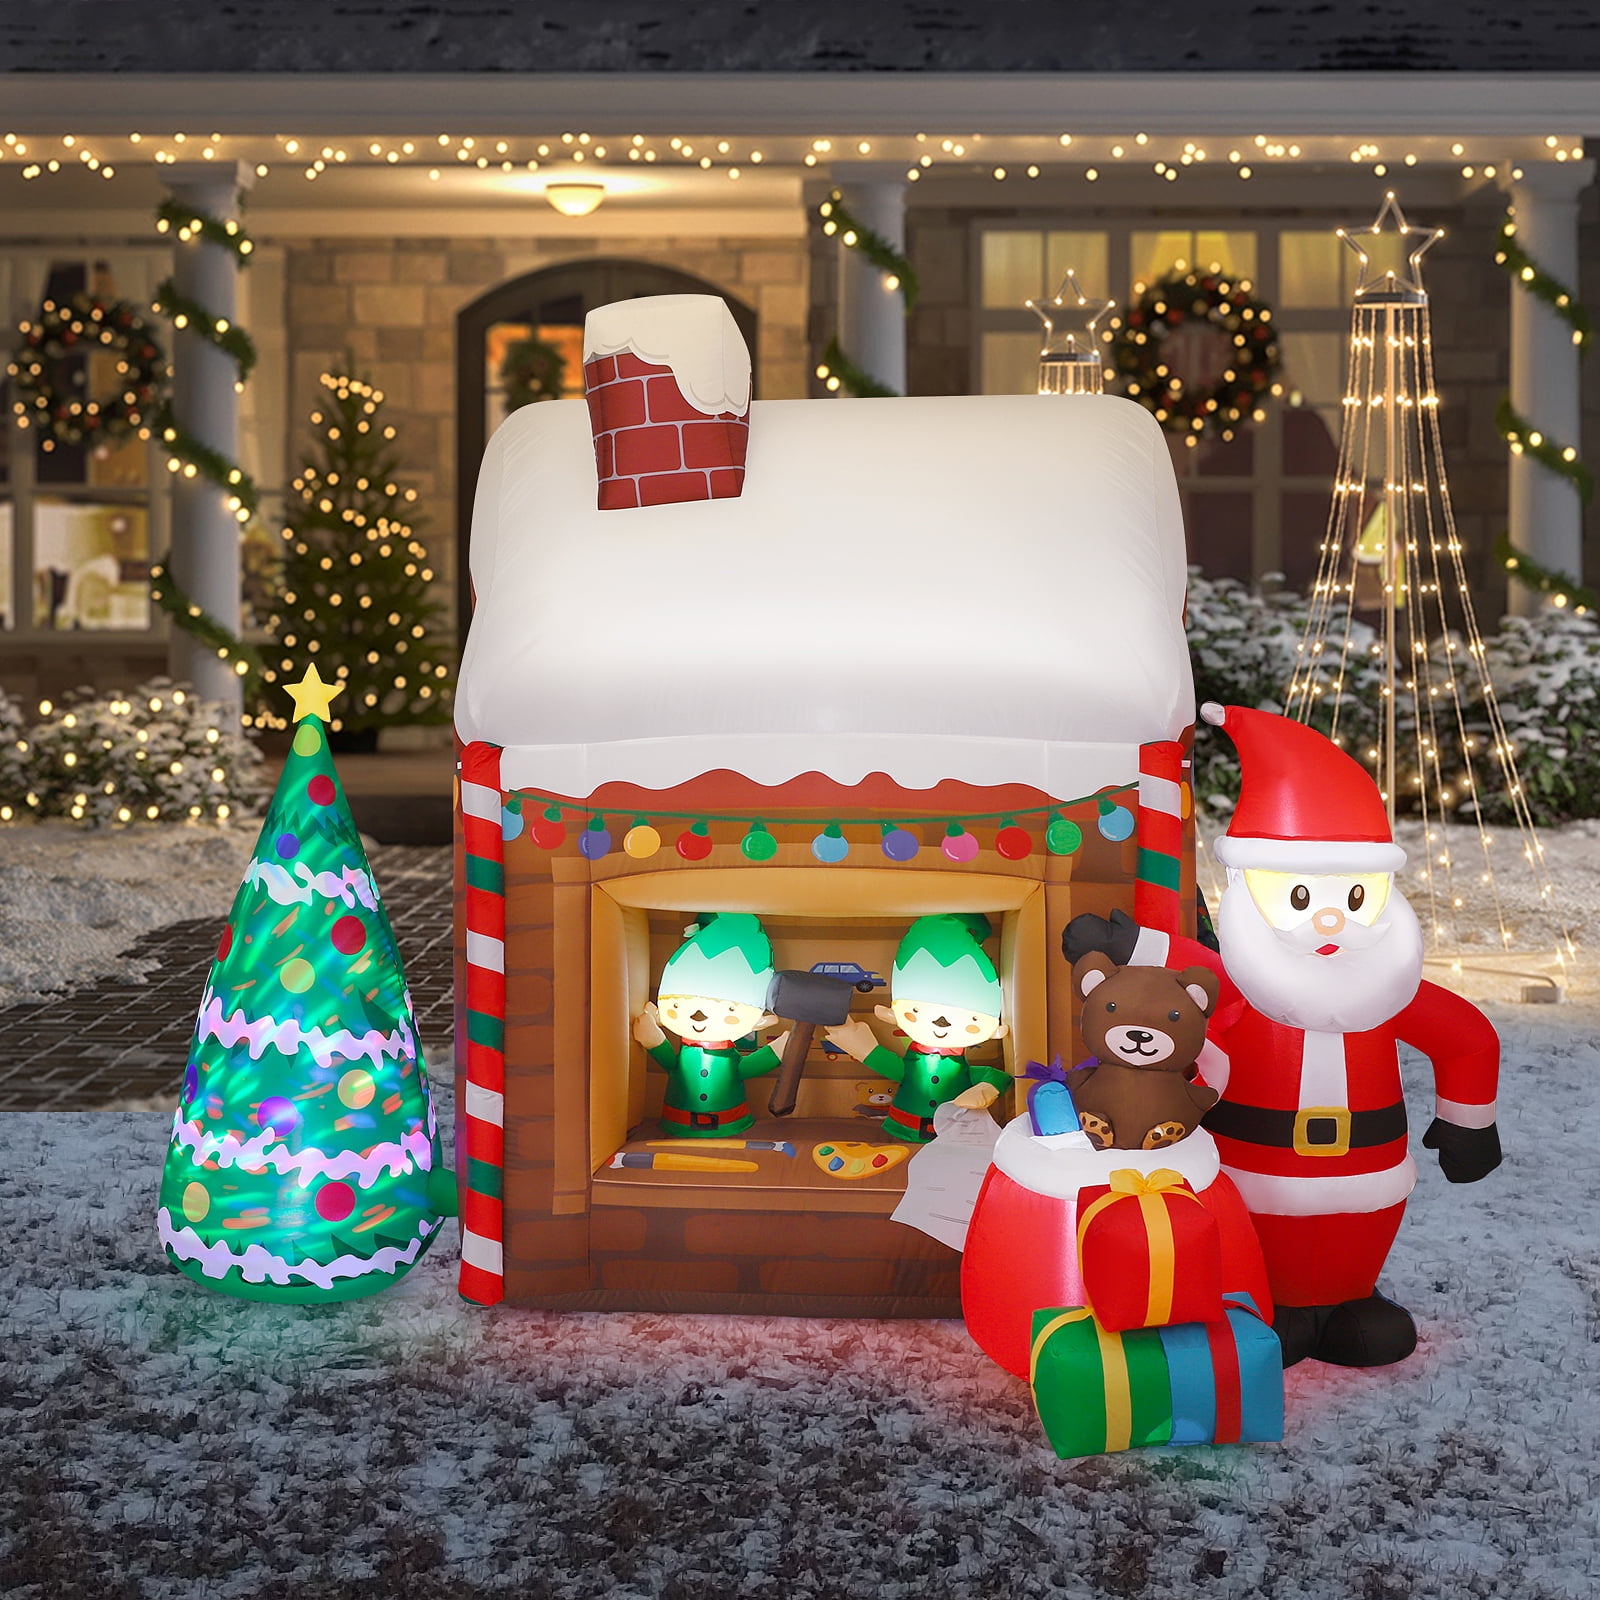 CHRISTMAS SANTA 6.5 FT TREE WITH PRESENTS AIRBLOWN INFLATABLE YARD DECORATION 